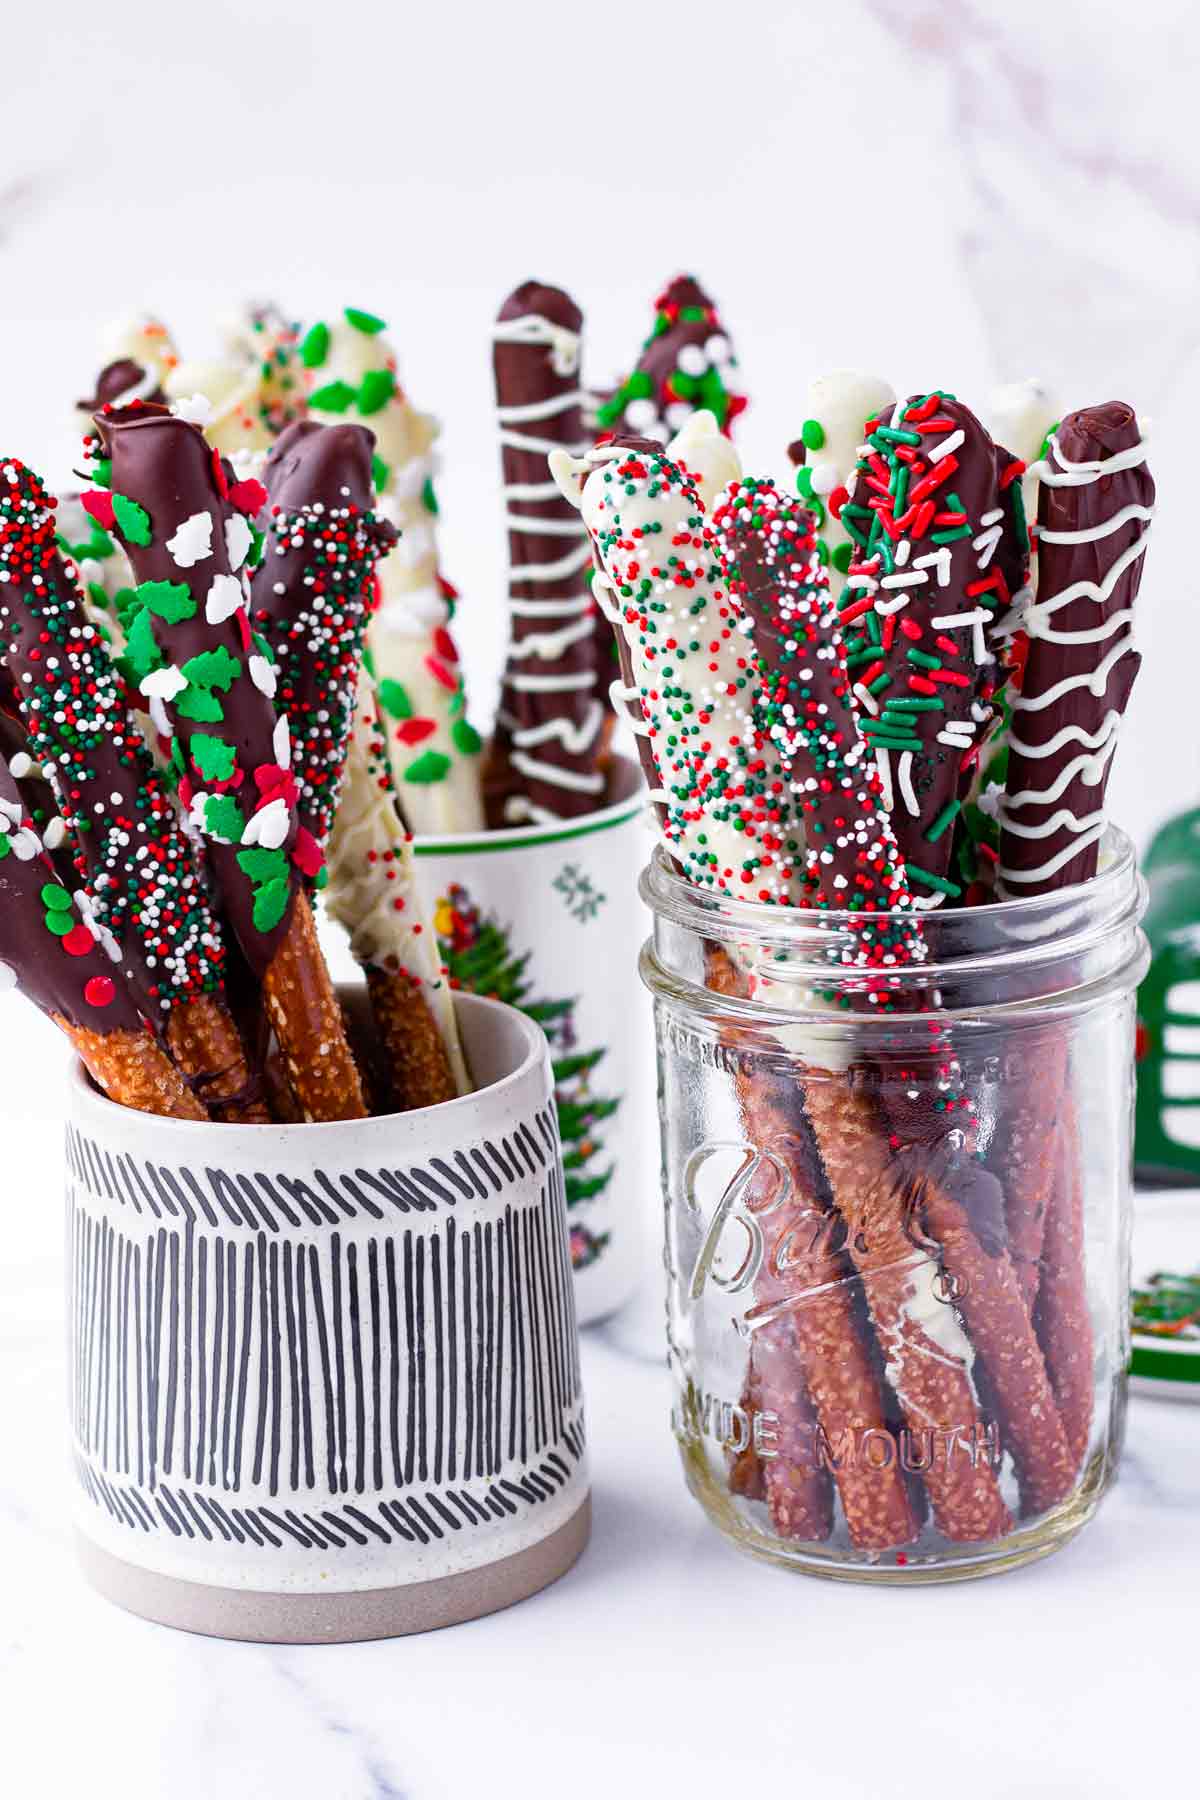 assorted chocolate covered pretzel rods with Christmas decorations